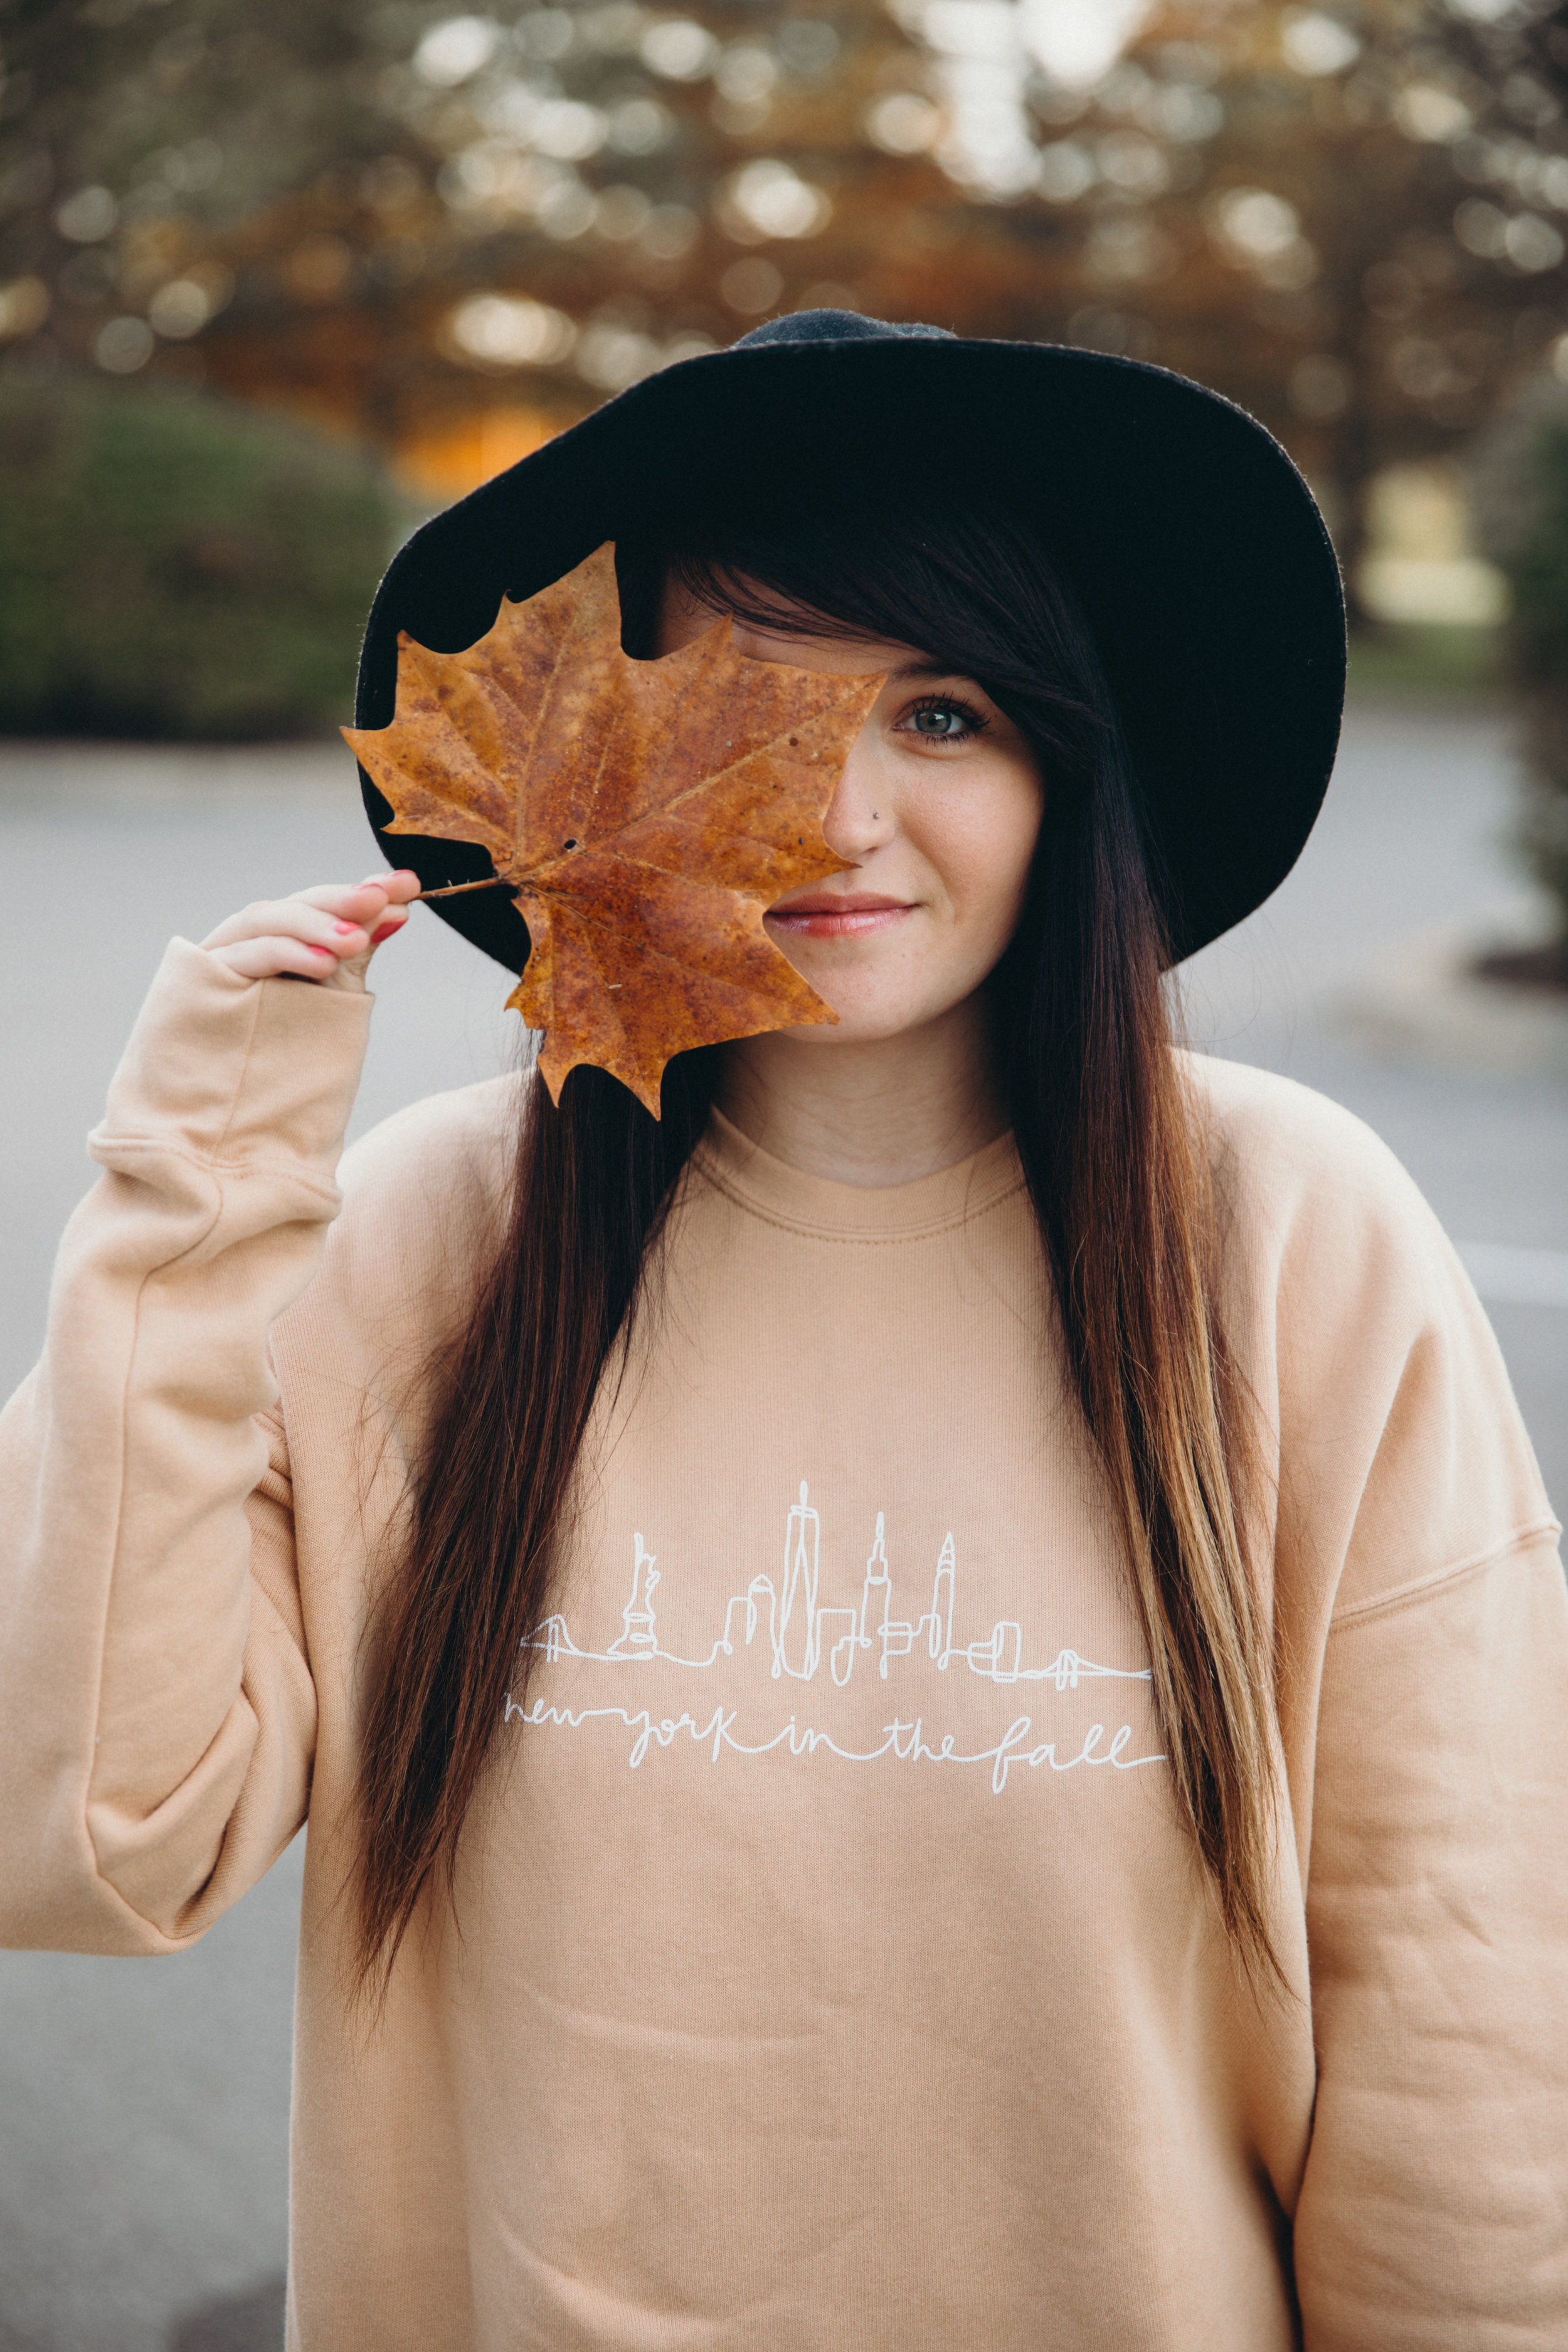 New York In The Fall You've Got Mail Sweatshirt Chelcey Tate x The Cake Shop www.chelceytate.com